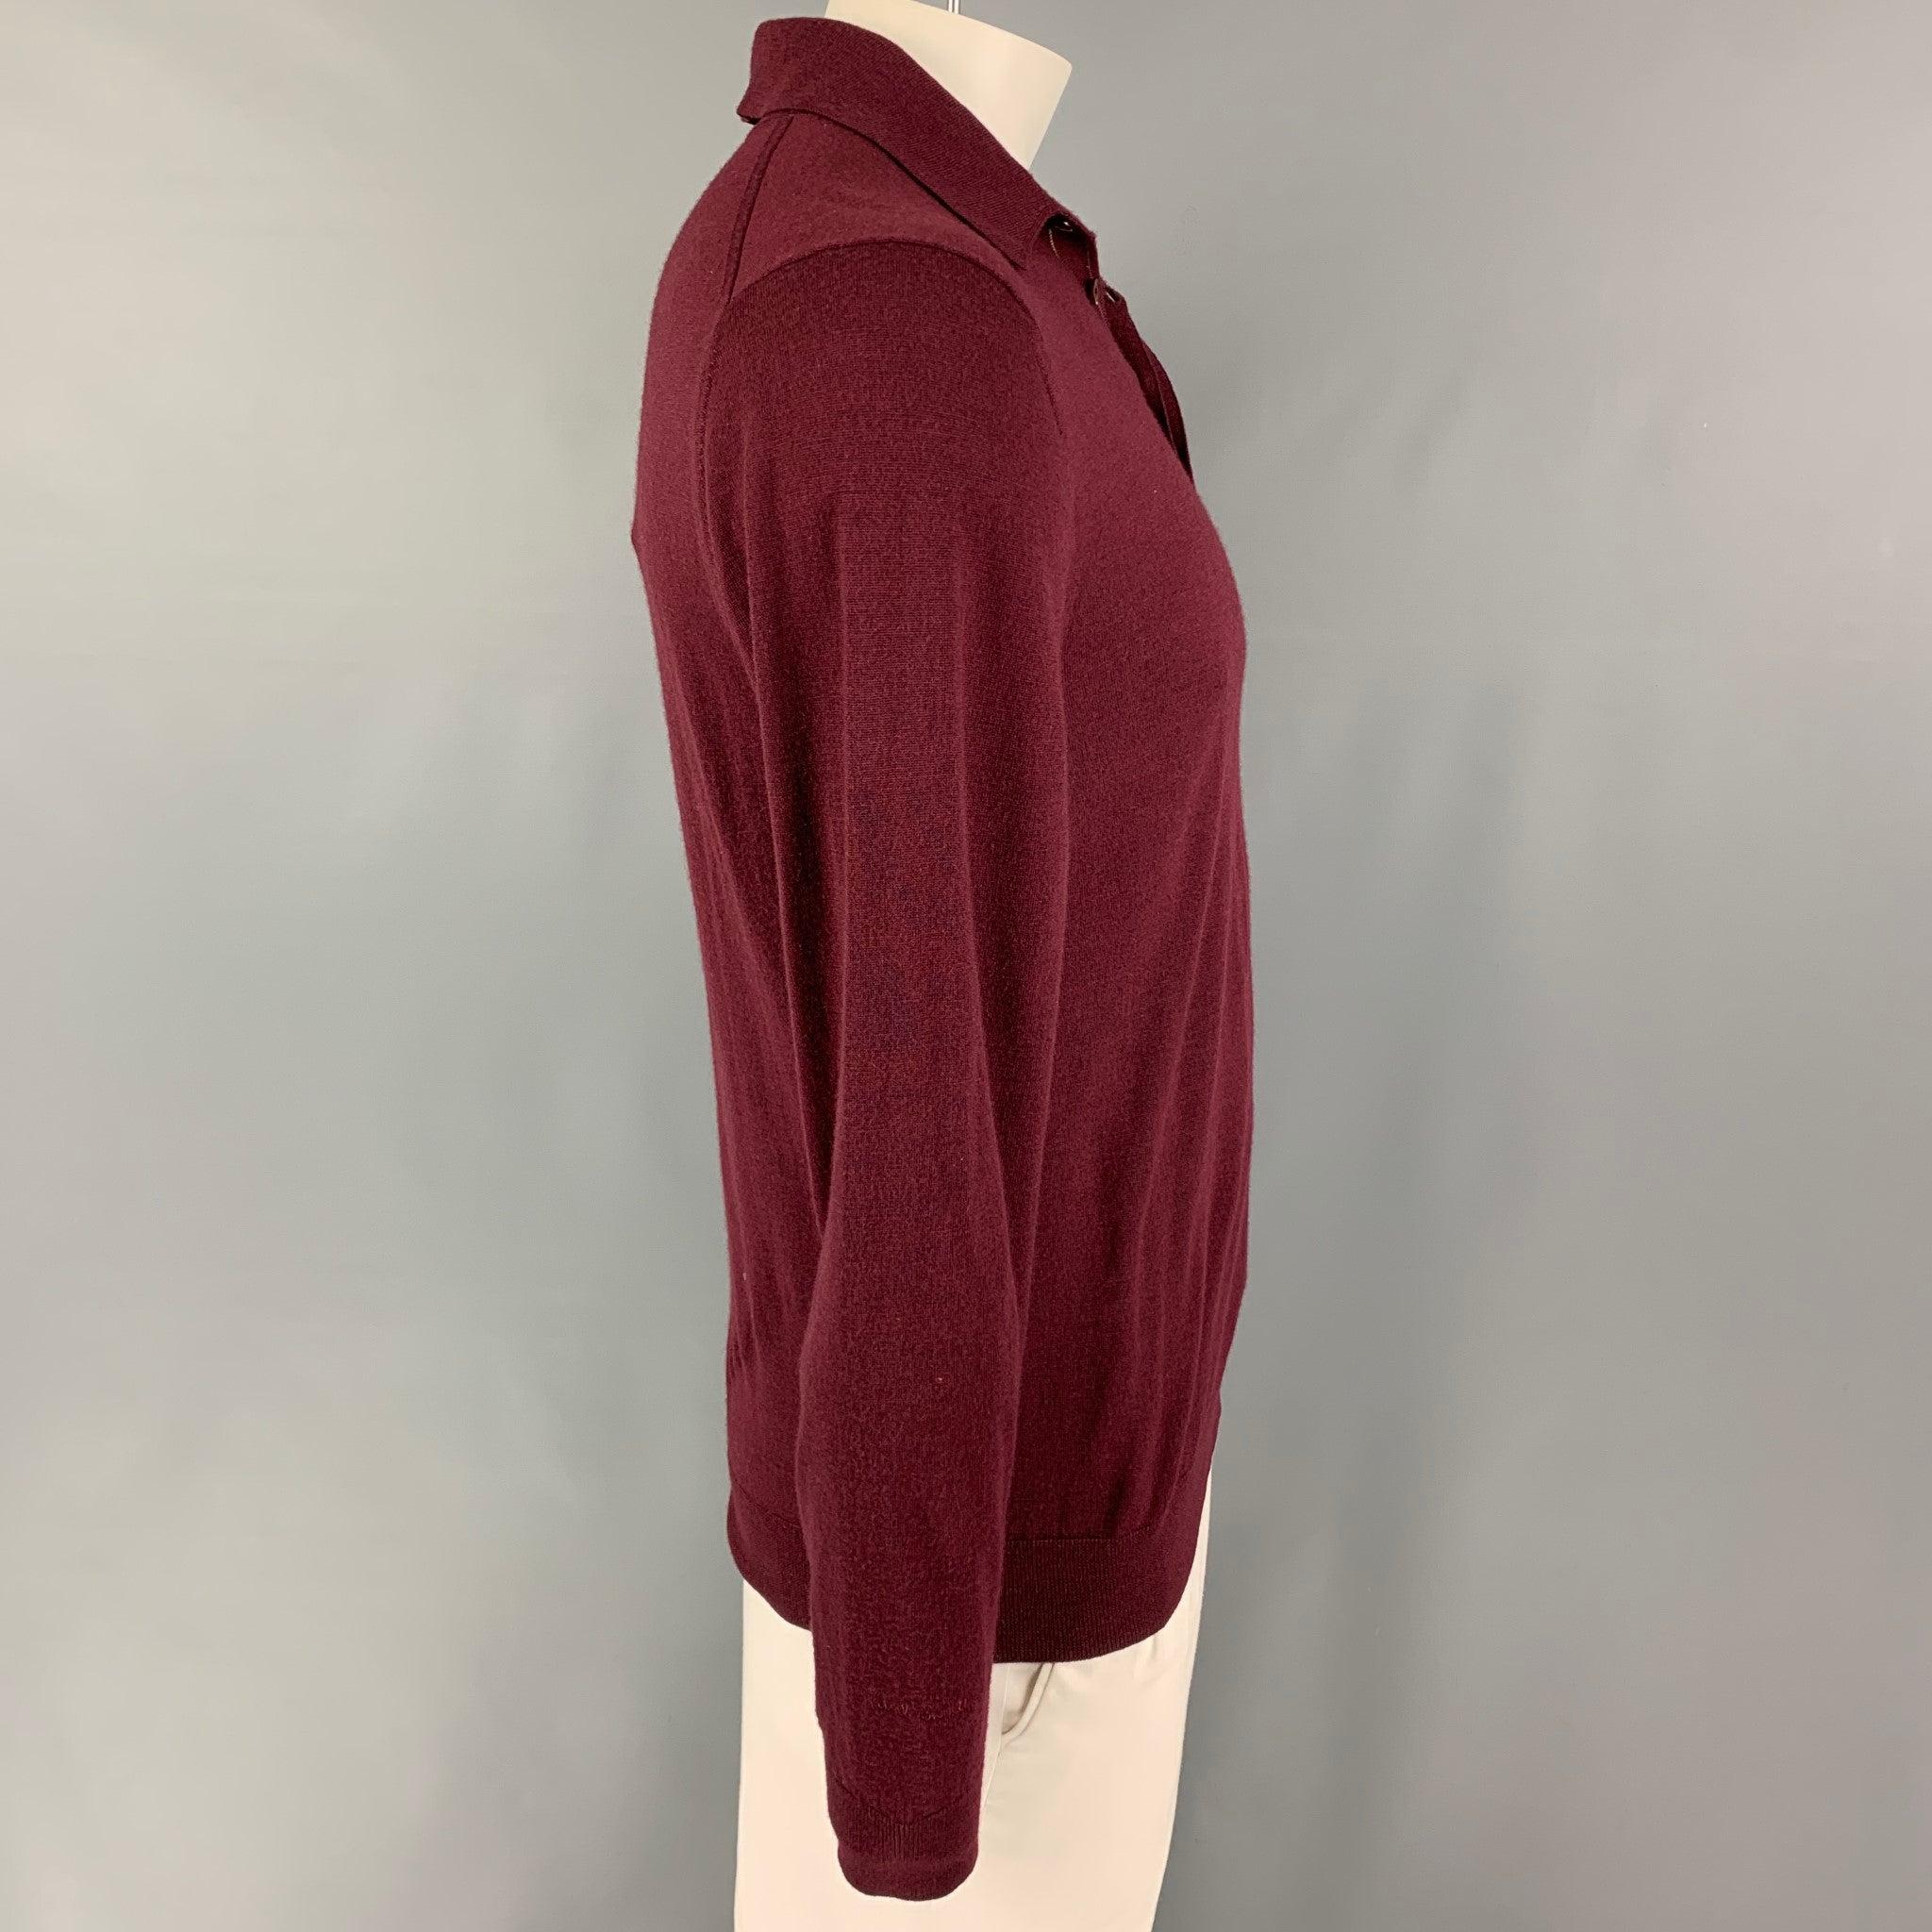 PAUL SMITH polo comes in a burgundy merino wool featuring long sleeves, spread collar, and a hidden buttoned closure.
Very Good
Pre-Owned Condition. 

Marked:   L  

Measurements: 
 
Shoulder: 19 inches Chest: 40 inches Sleeve: 27 inches Length: